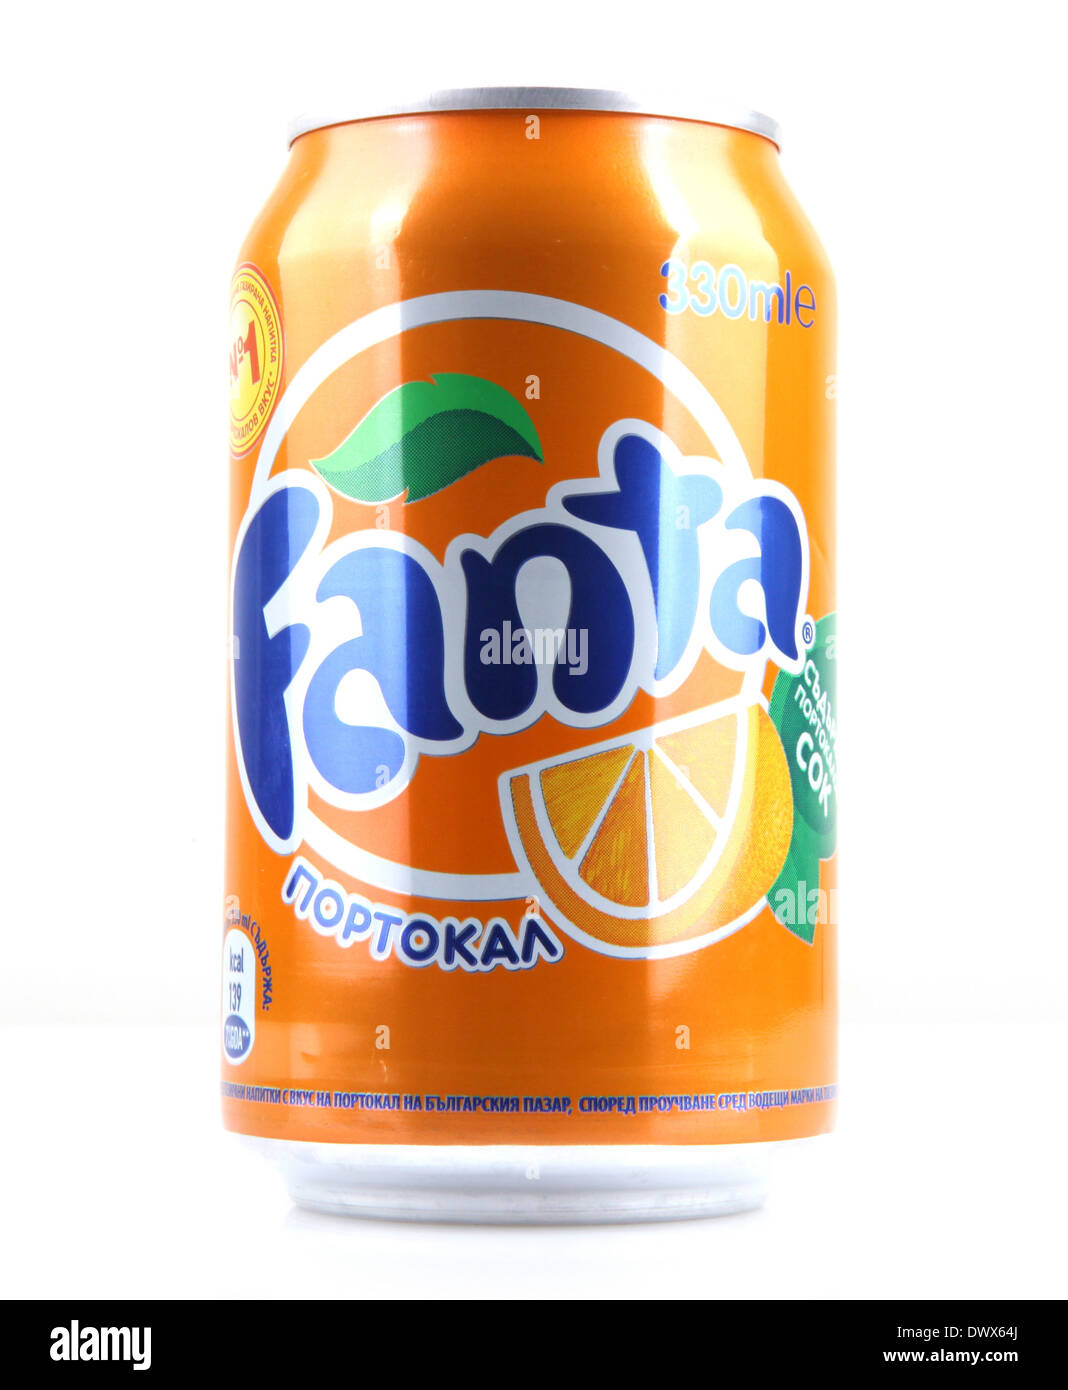 AYTOS, BULGARIA - MARCH 14, 2014: Fanta can isolated on white background. Fanta is a carbonated soft drink sold in stores, Stock Photo